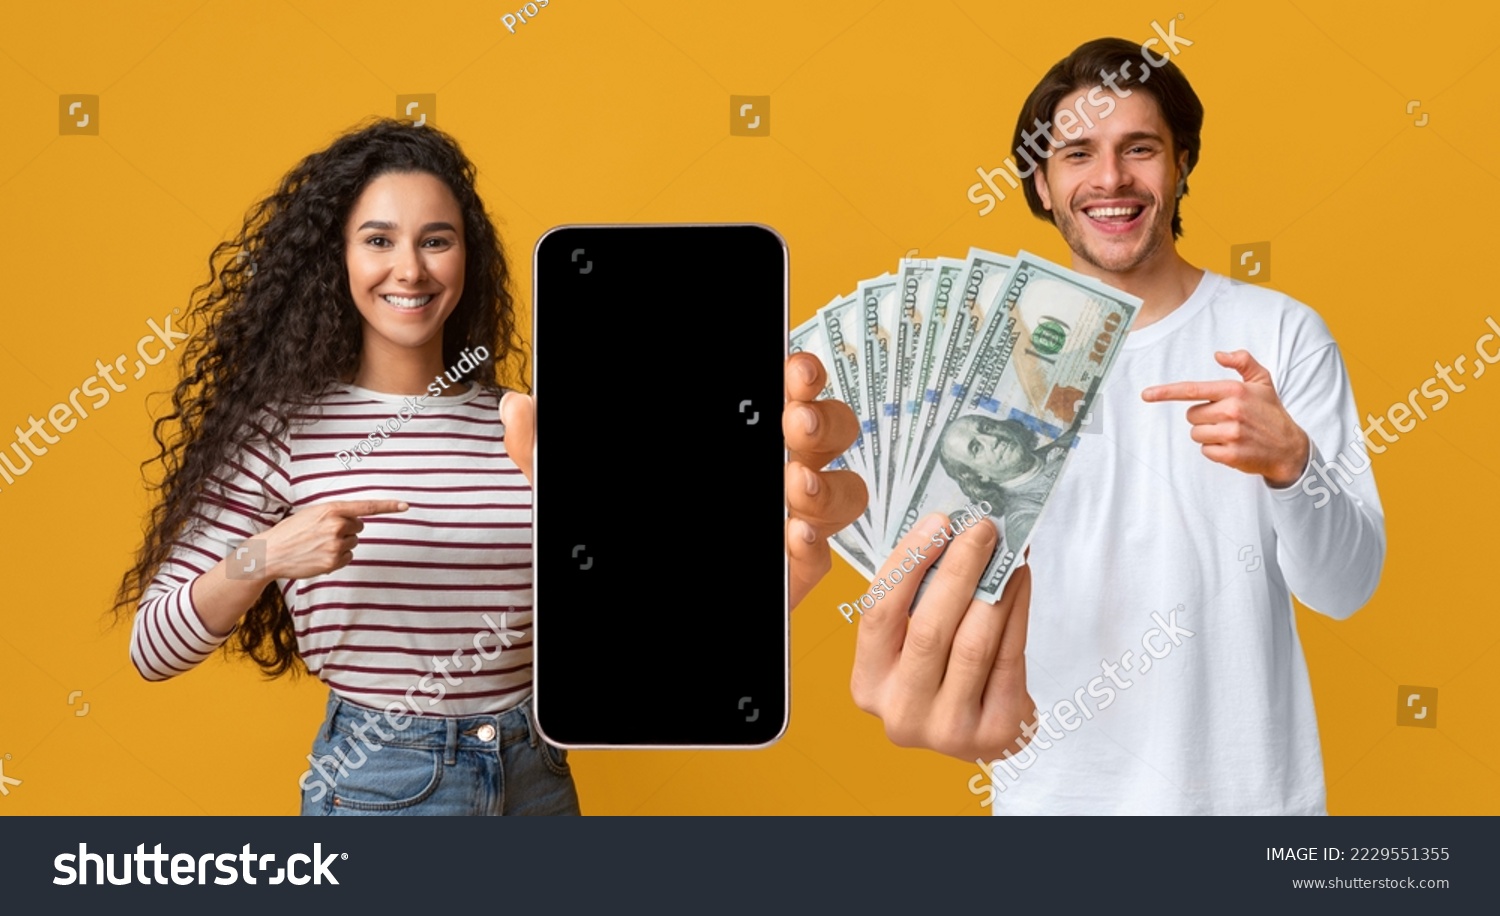 Cheerful young lovers man and woman gambling on Internet, using cell phone with black empty screen, pointing at smartphone, bunch of dollars, yellow studio background, mockup. Online bet concept #2229551355